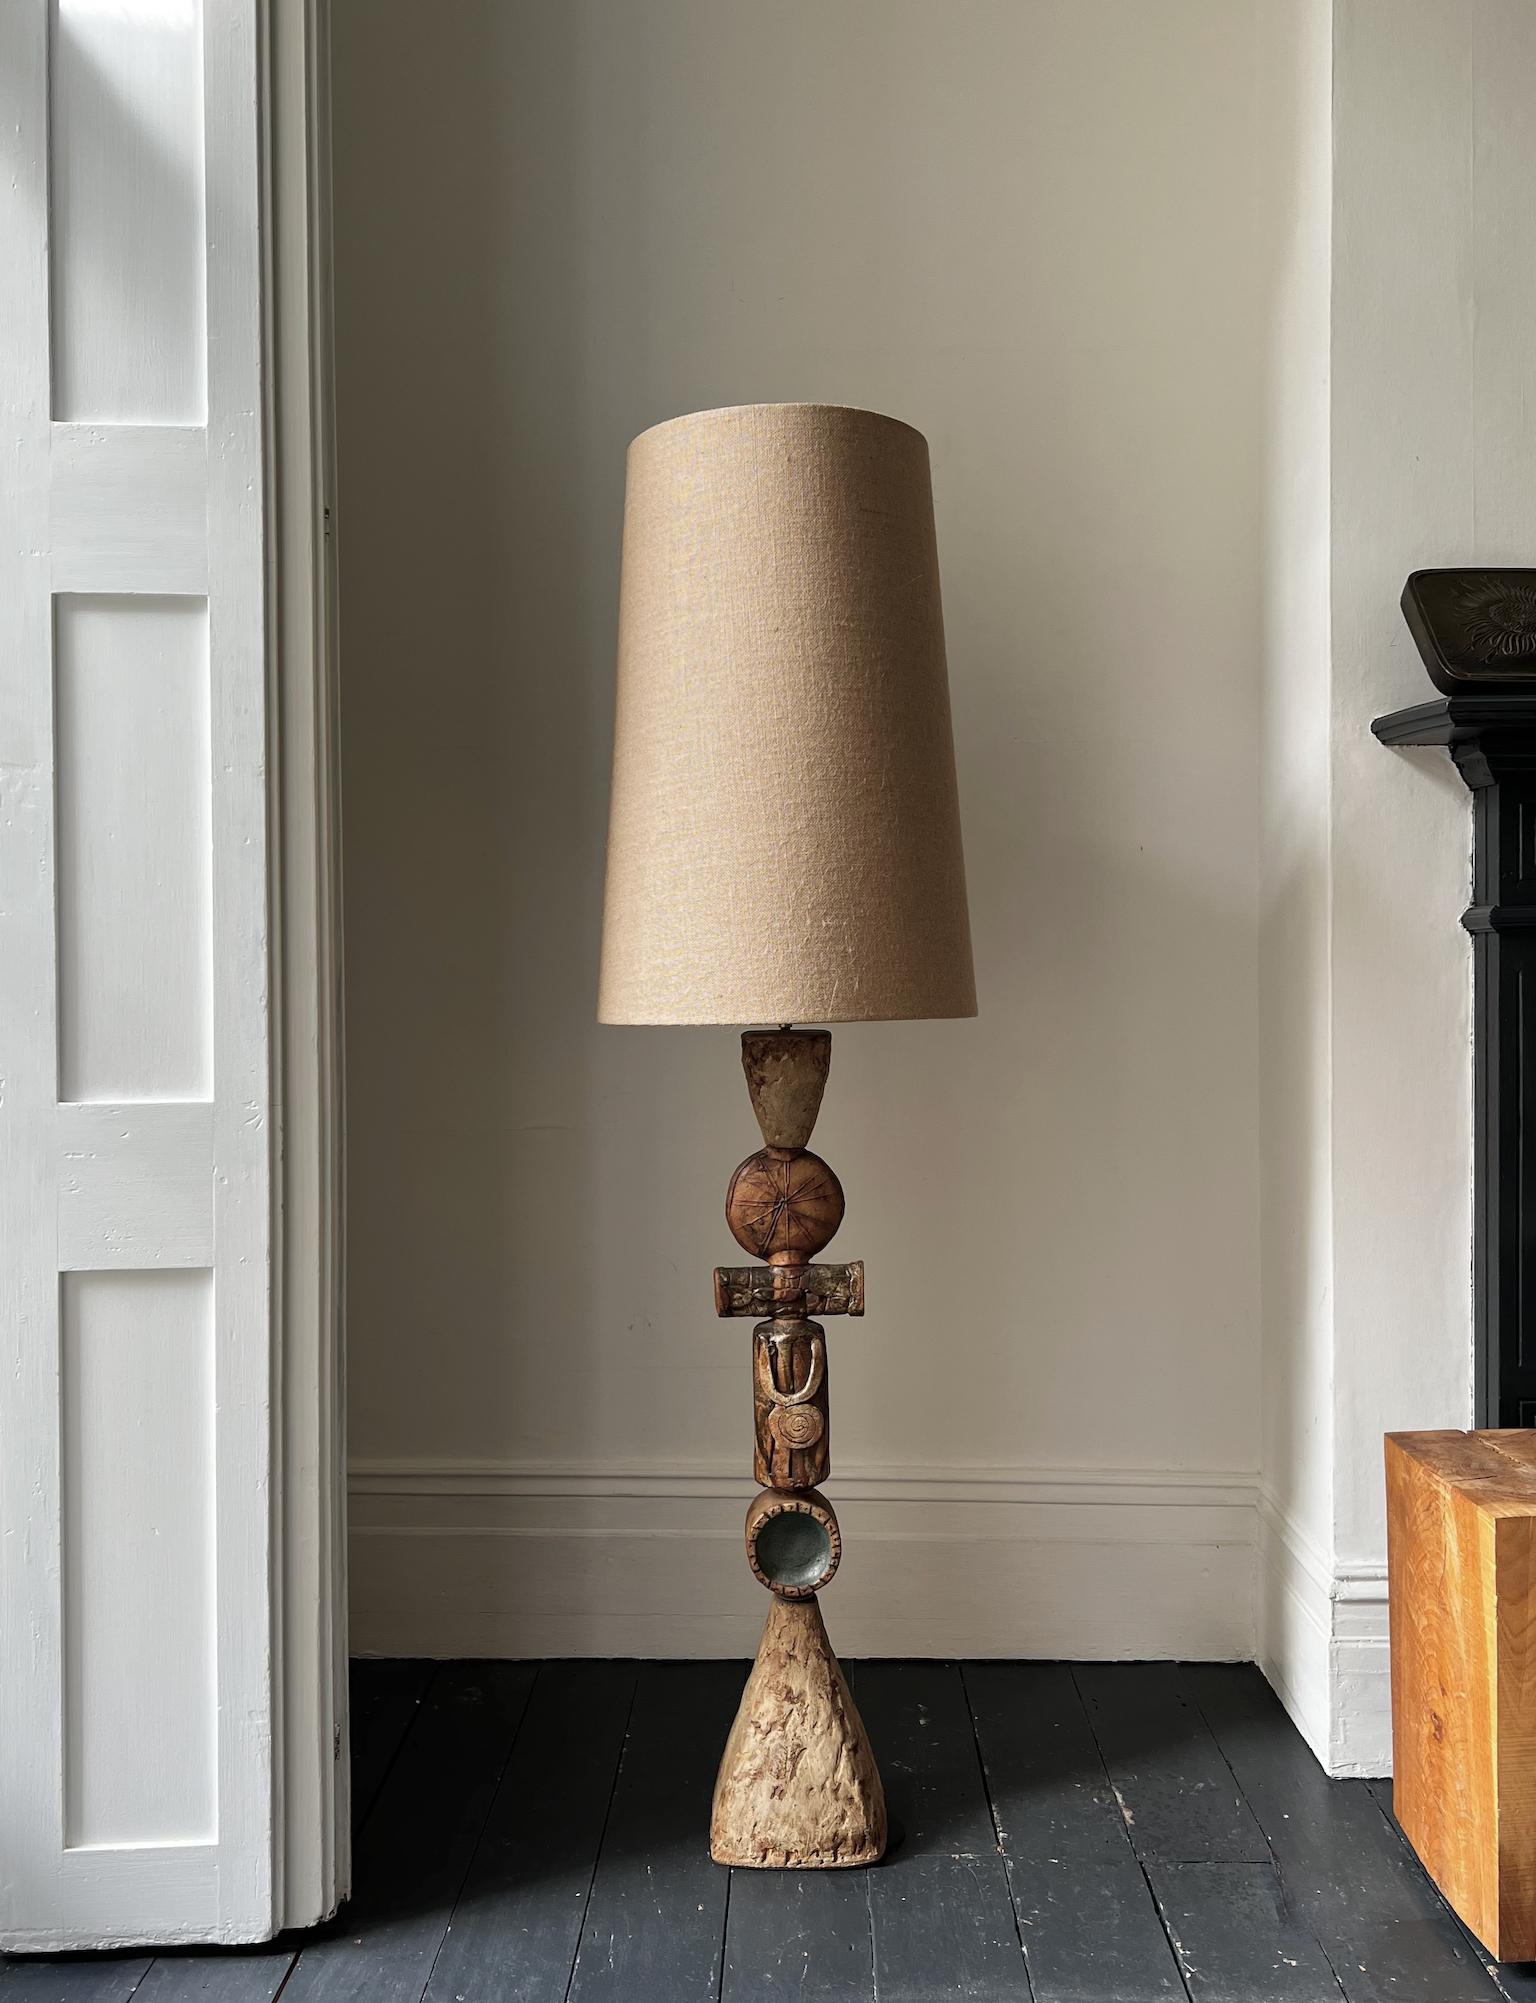 A mid-20th century totem lamp by ceramicist Bernard Rooke, England. 

An early piece, and unusual to see this example of Rooke's work; hand-built, with great character in natural shades of brown, terracotta, light oatmeal and grey. A tall piece for